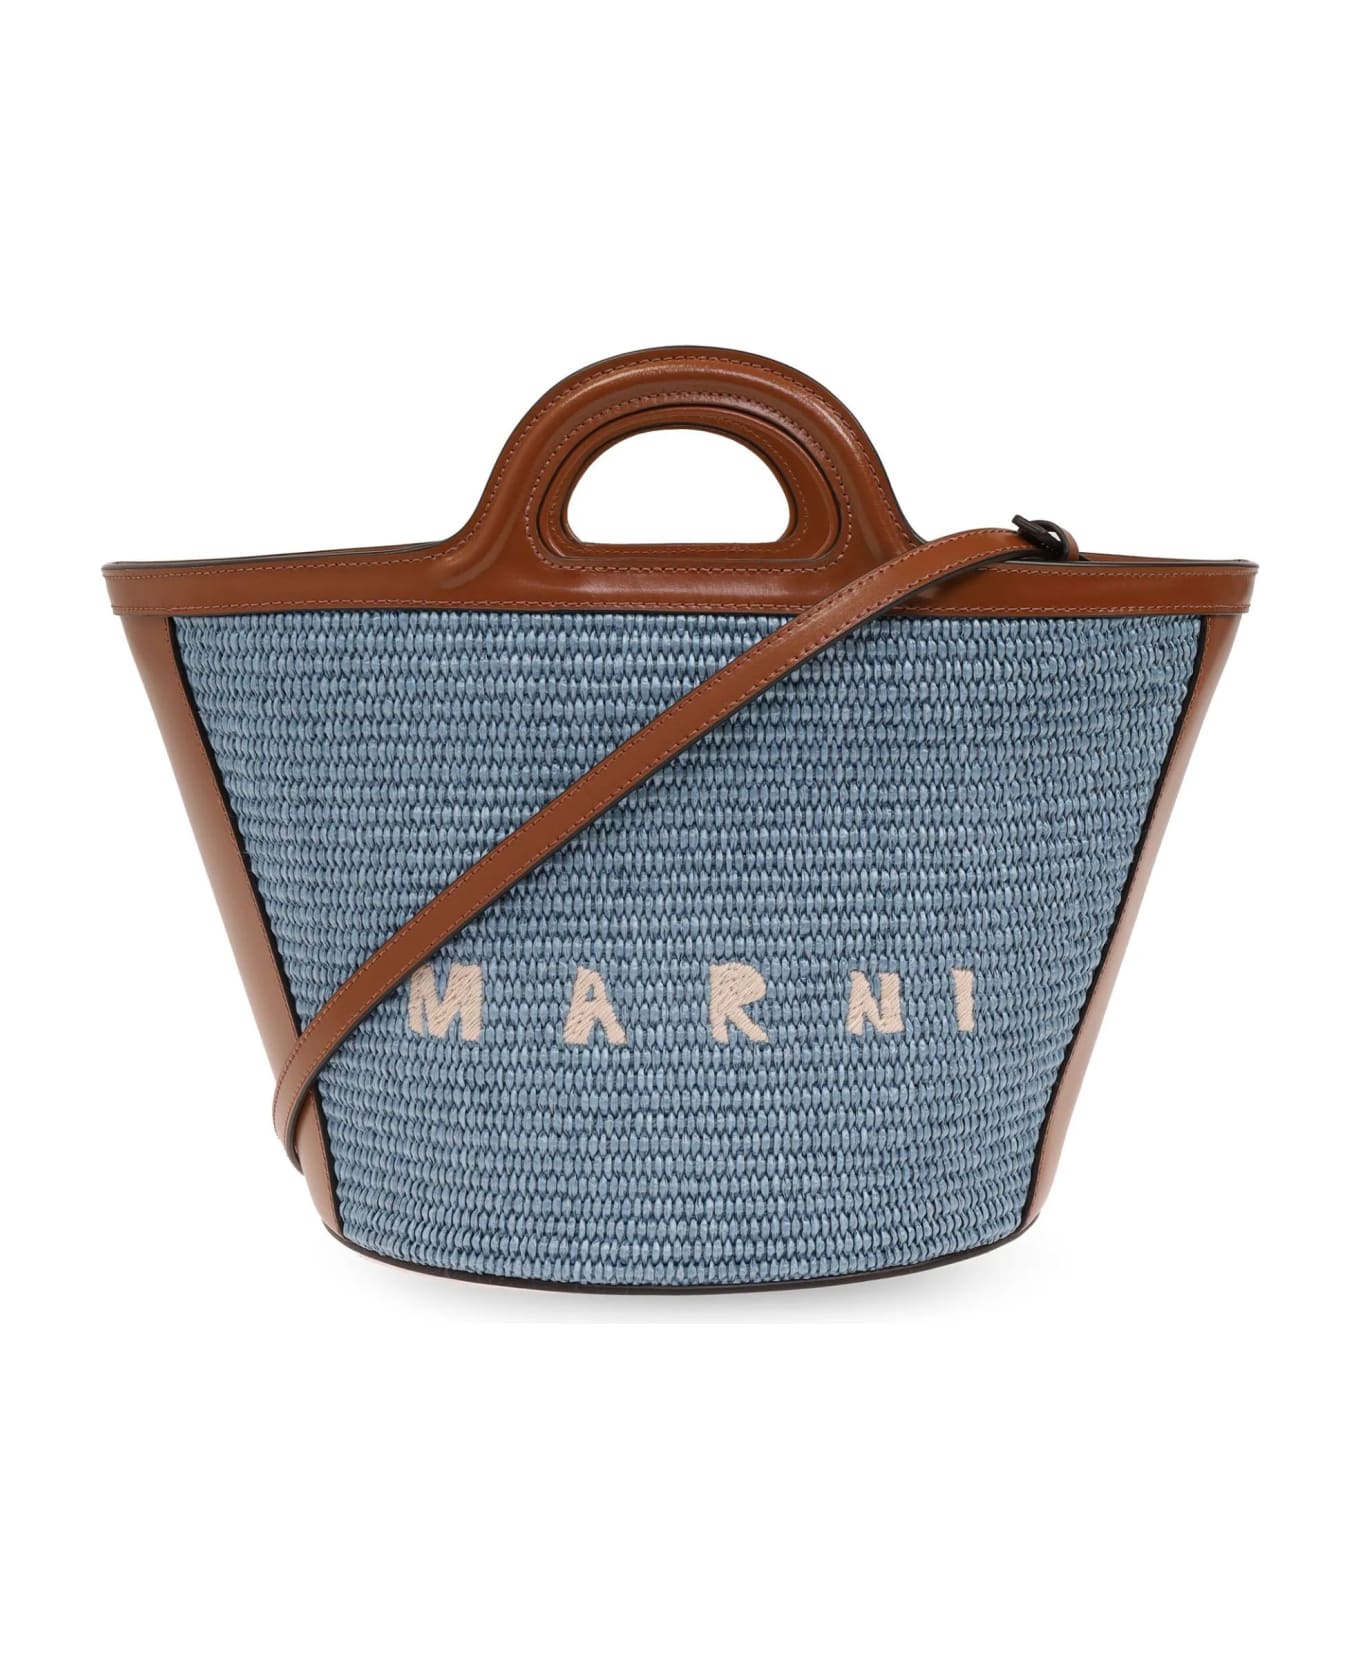 Marni Small Tropicalia Summer Bag In Brown Leather And Light Blue Raffia - Brown